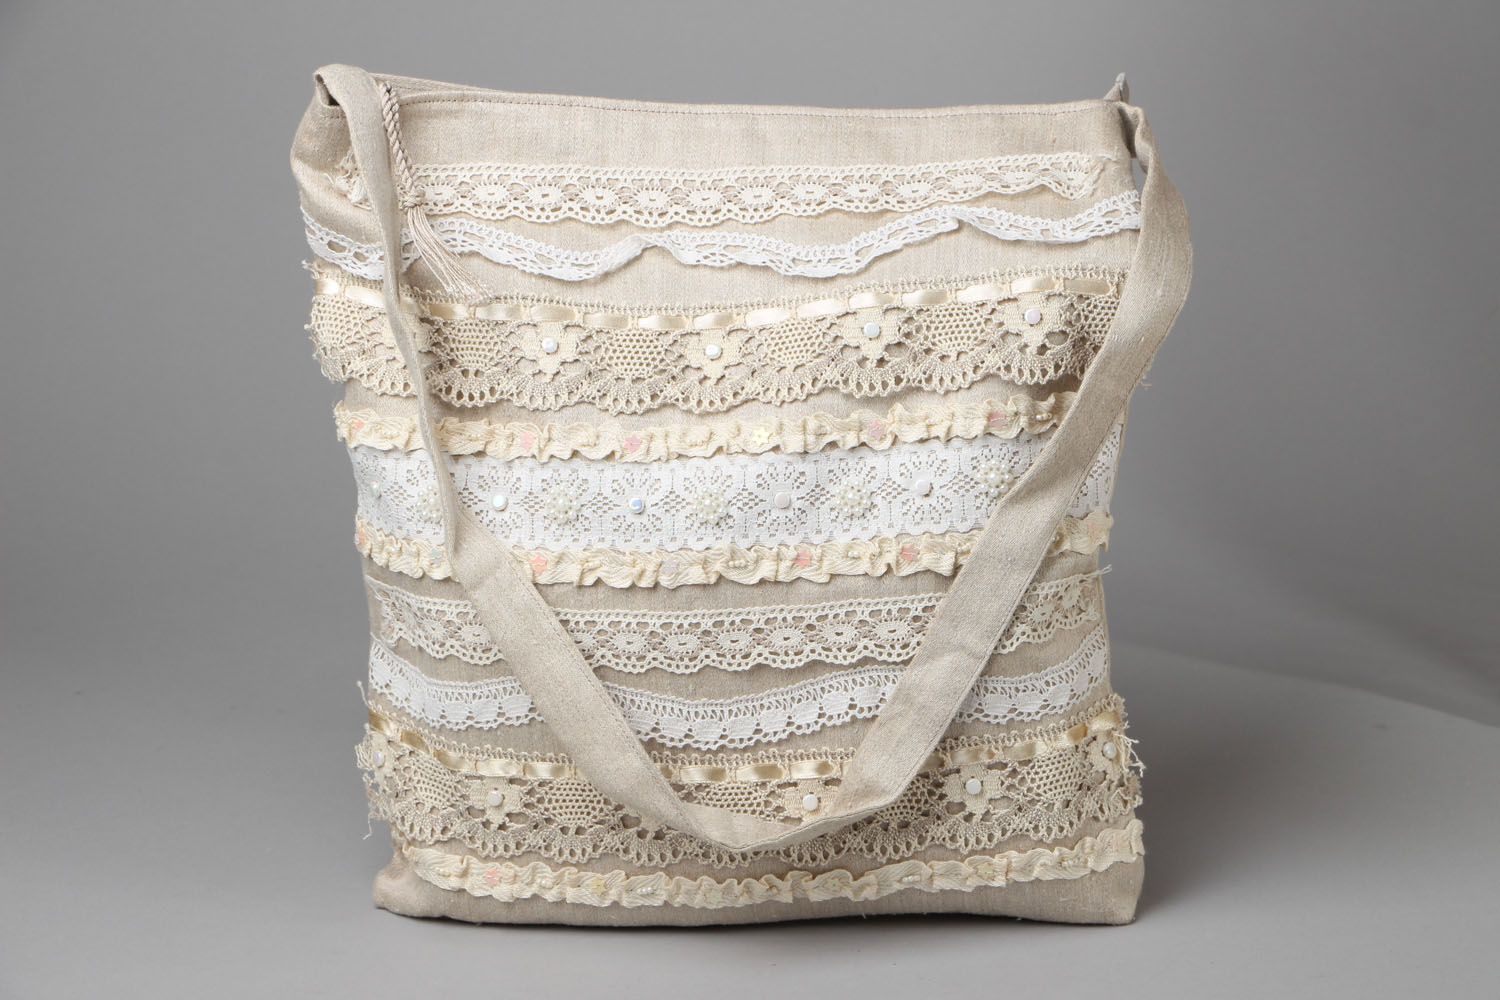 Women's purse with lace photo 1